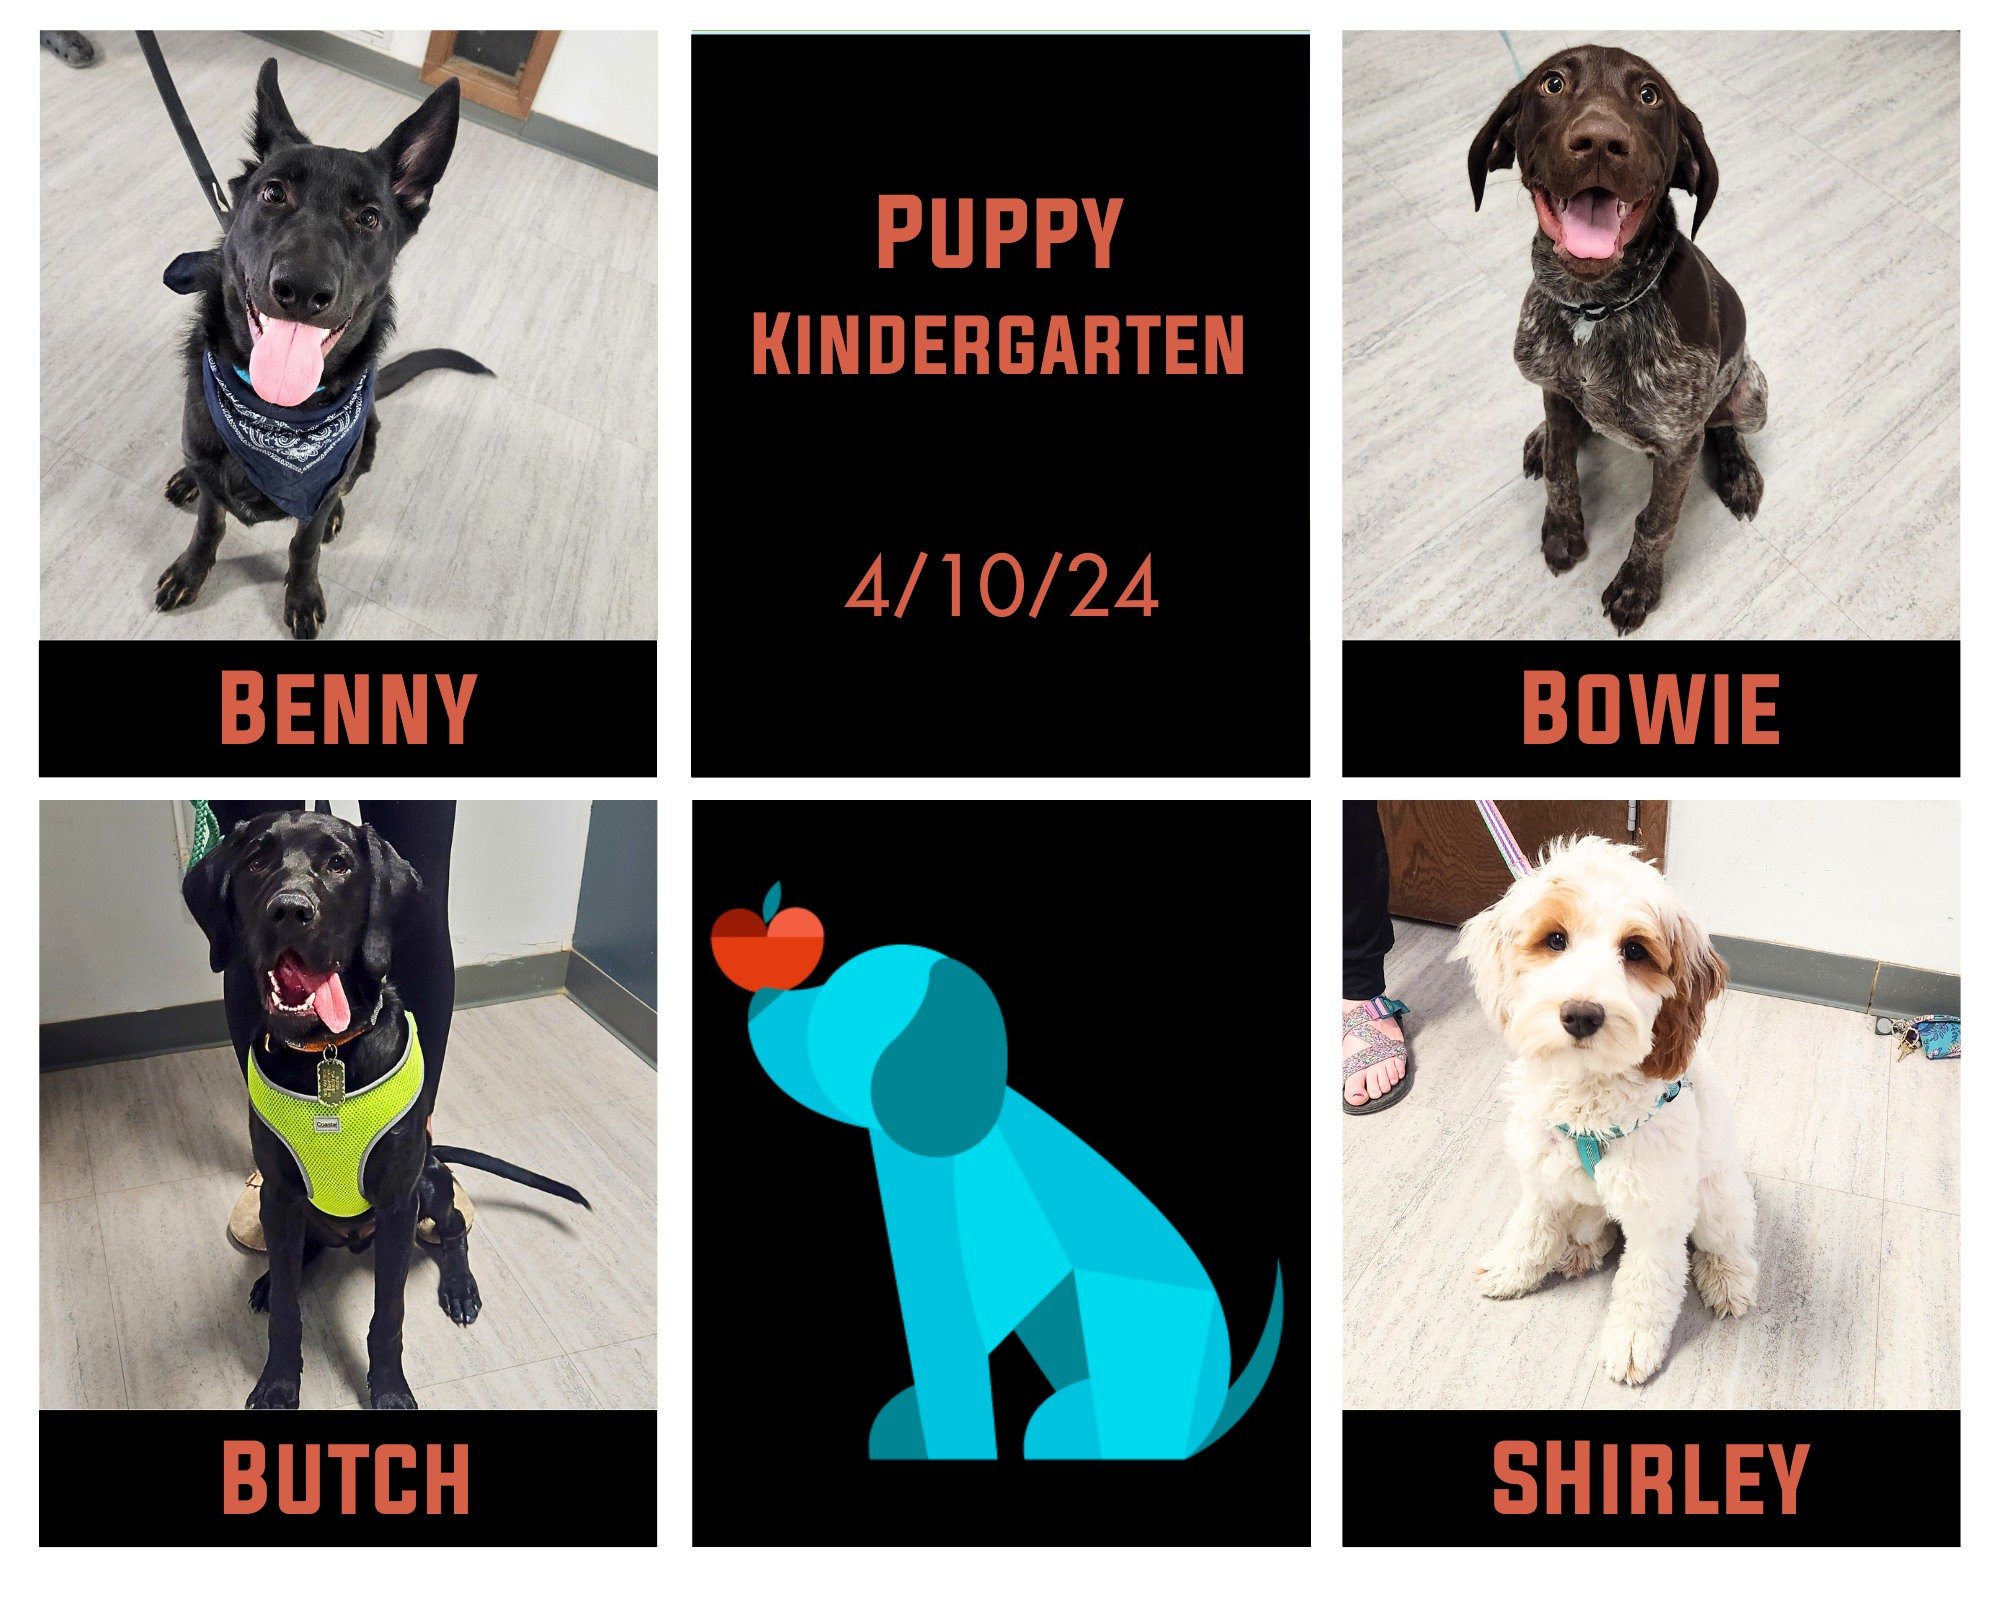 Puppy graduate alert! Benny, Bowie, Butch, Shirley, &amp; Voo (who homeschooled for grad week) finished their Puppy Kindergarten this week! These pups honed their play skills, manners, and grew so much. Congrats, grads!
.
.
.
.
 #ScienceBasedTraining